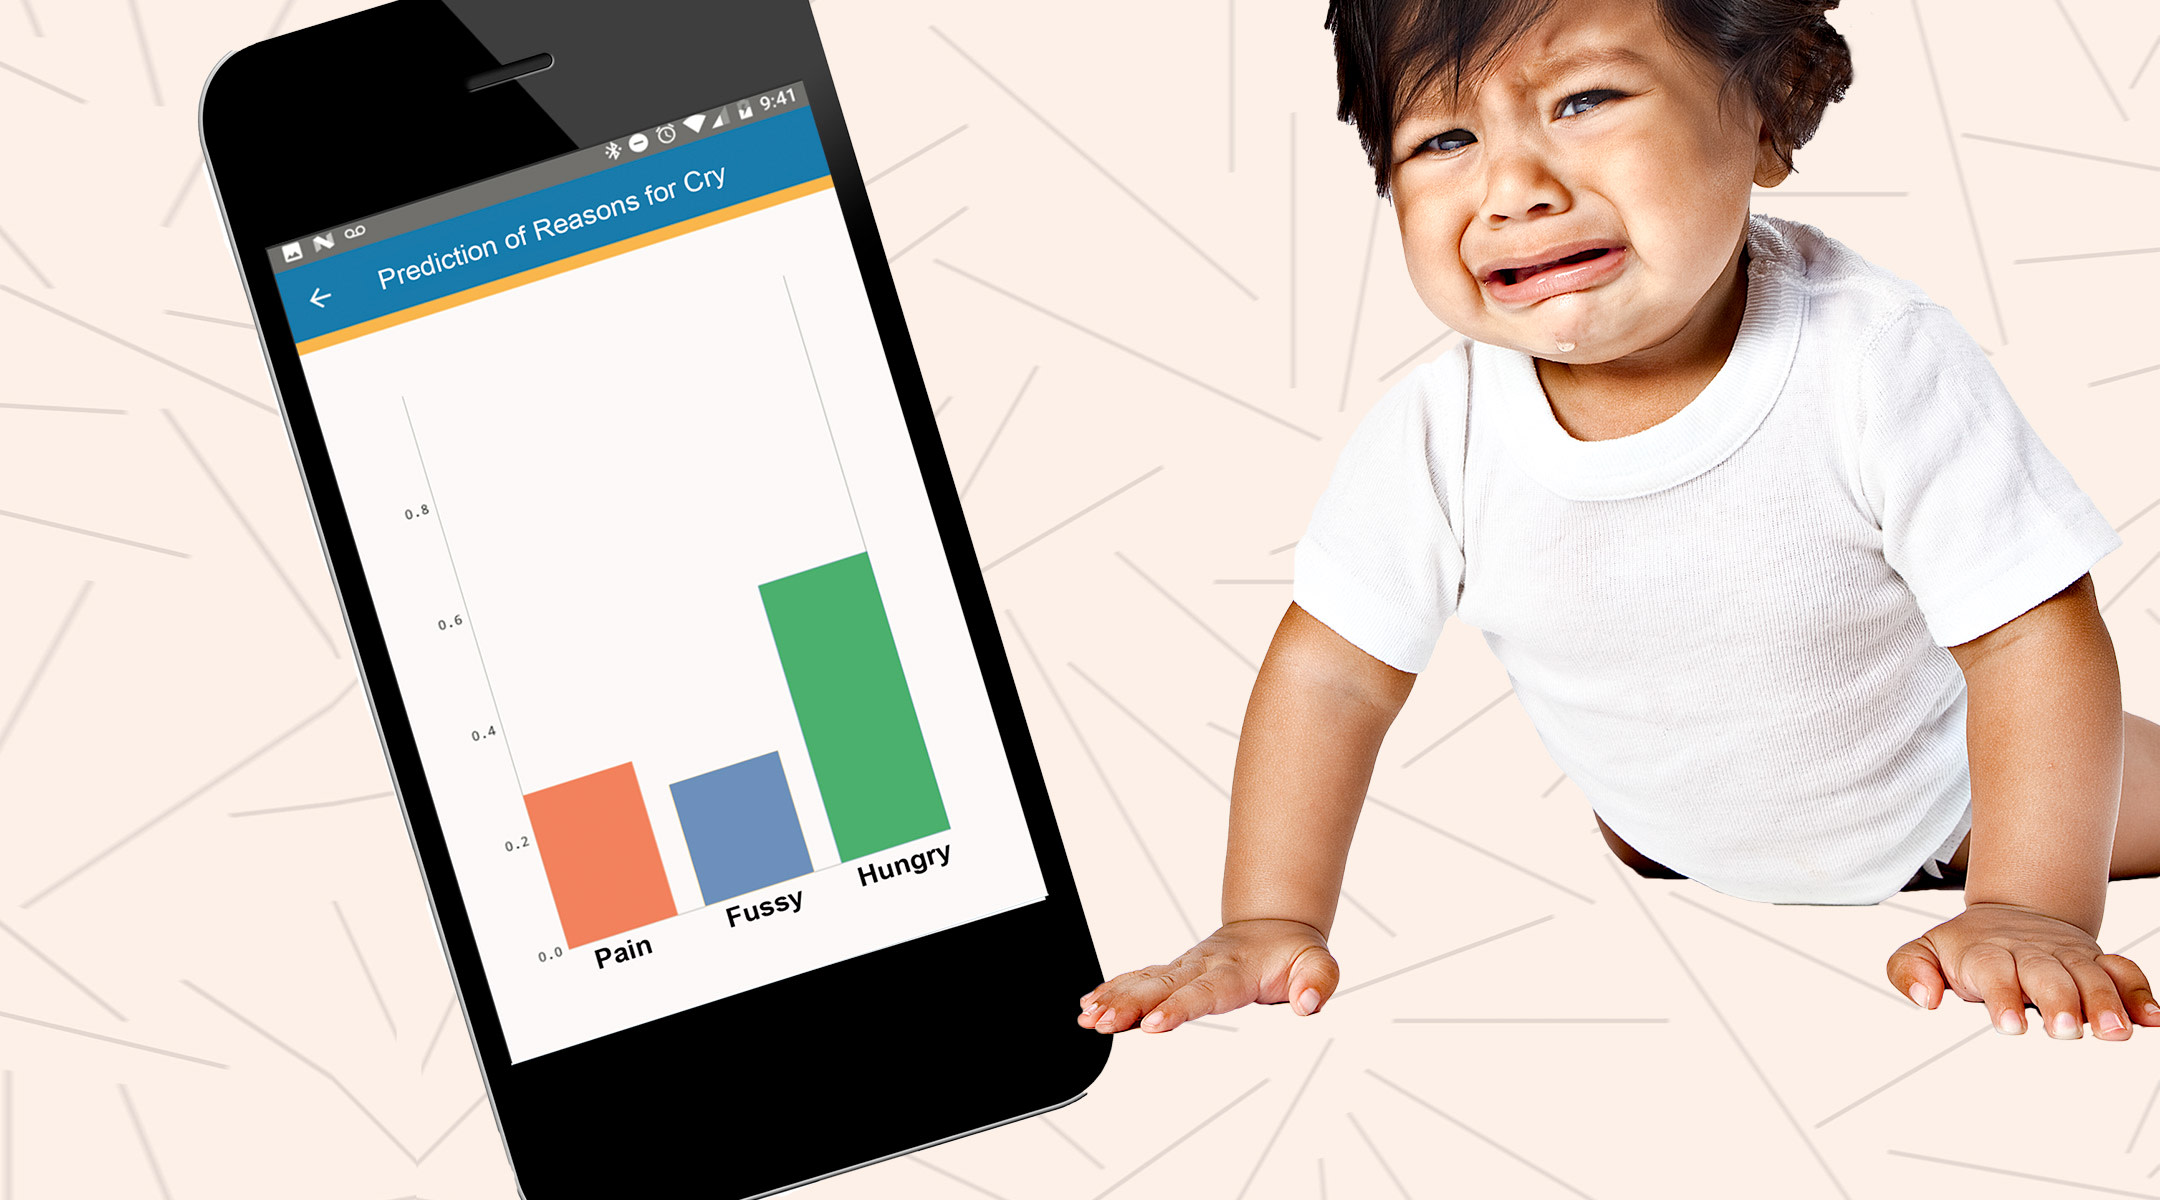 new app chatterbox can decode baby's cries